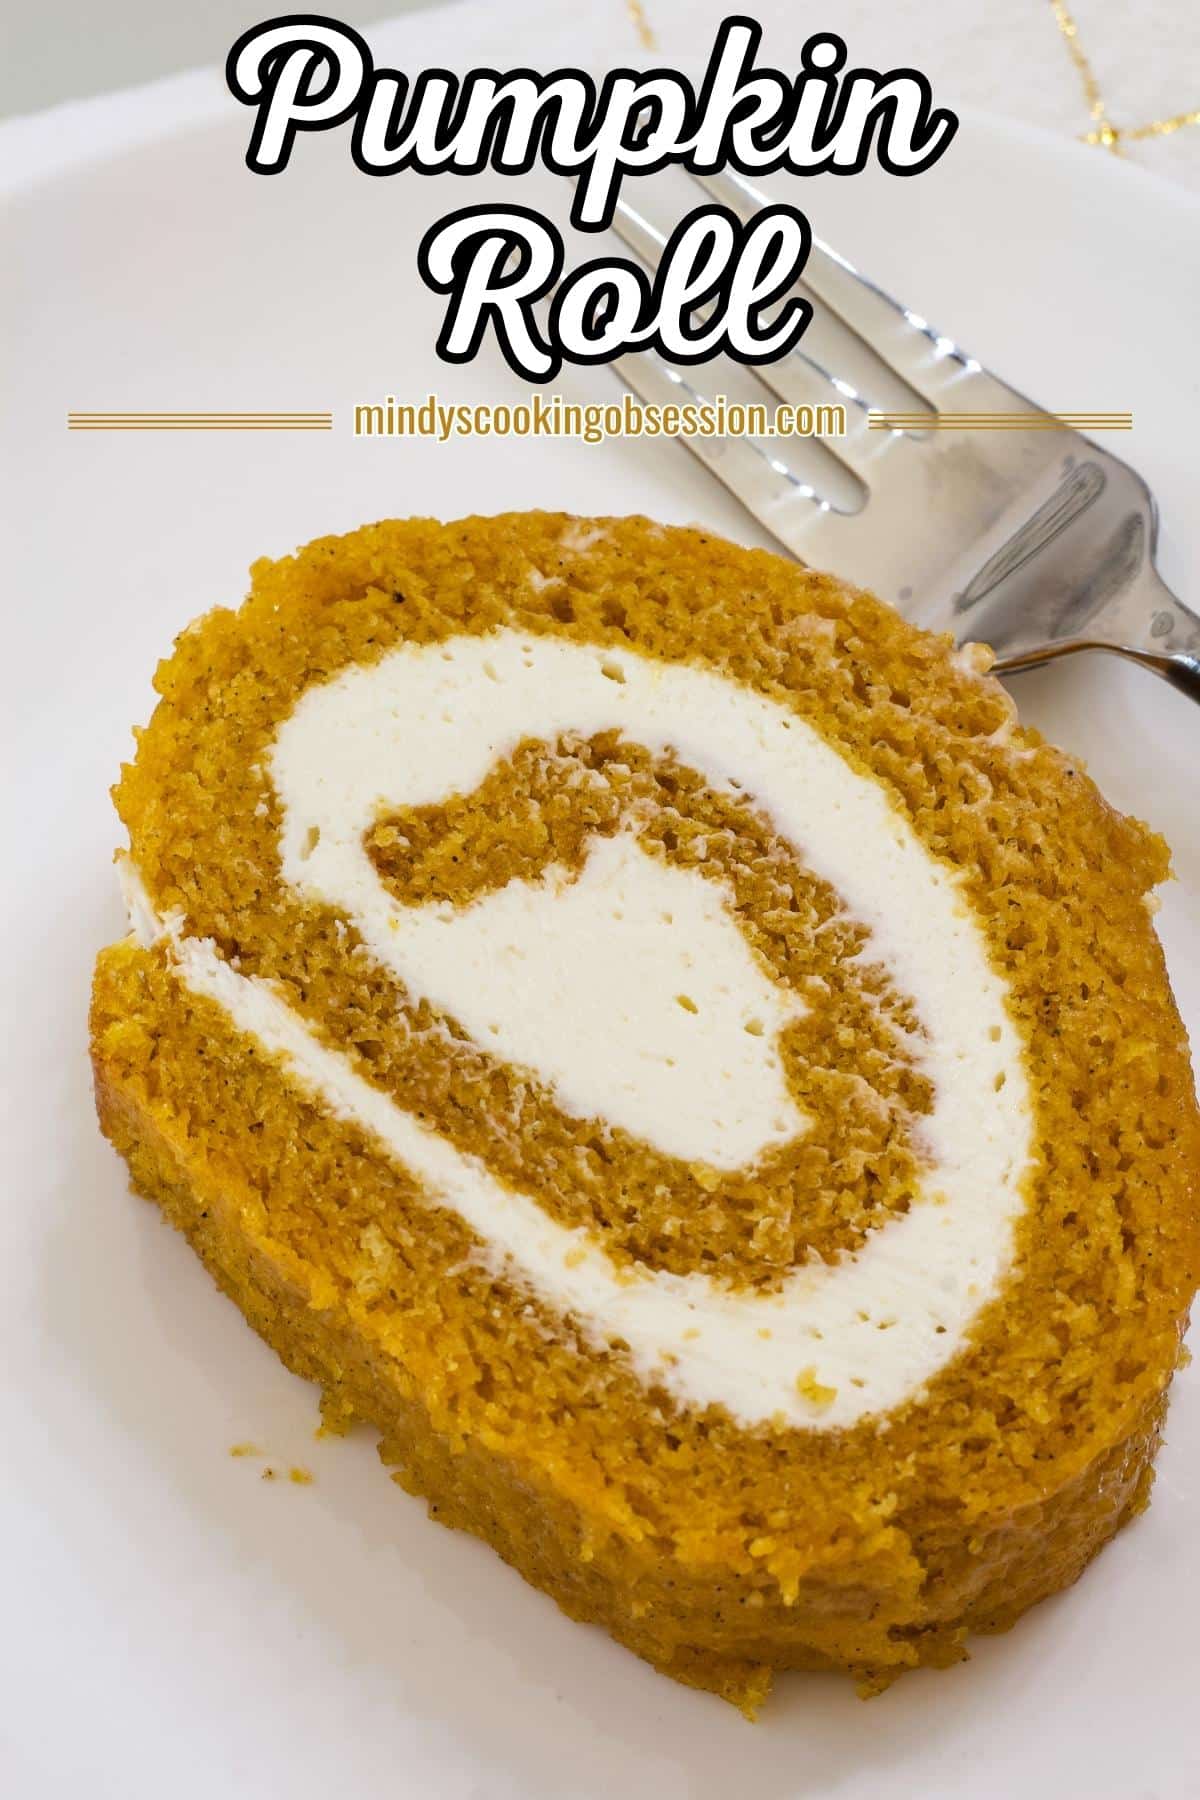 Libby's Pumpkin Roll Recipe with Cream Cheese Filling a tender pumpkin cake with a beautiful presentation perfect for Thanksgiving dessert. It is easy and so impressive! via @mindyscookingobsession